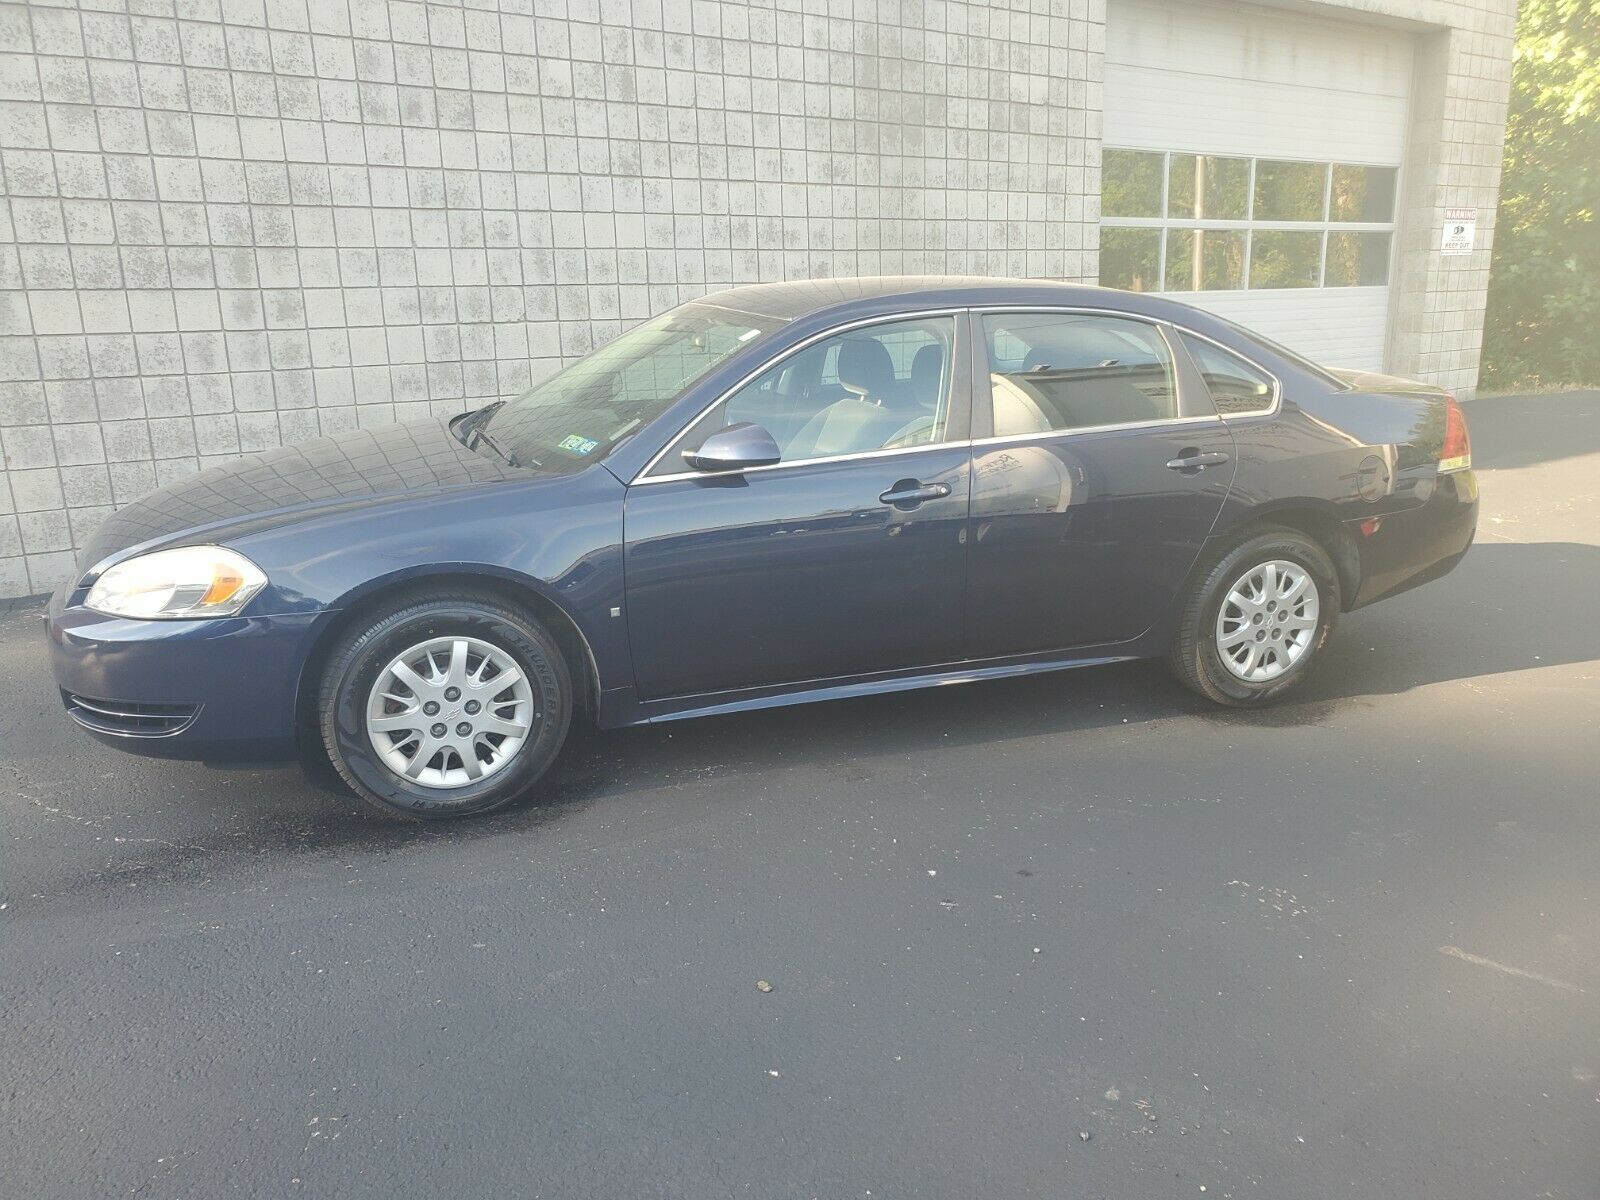 2010 Chevrolet Impala  2010 Impala With 3.9 V/6 . Police Package, Heavy Duty Steering, Suspension And T